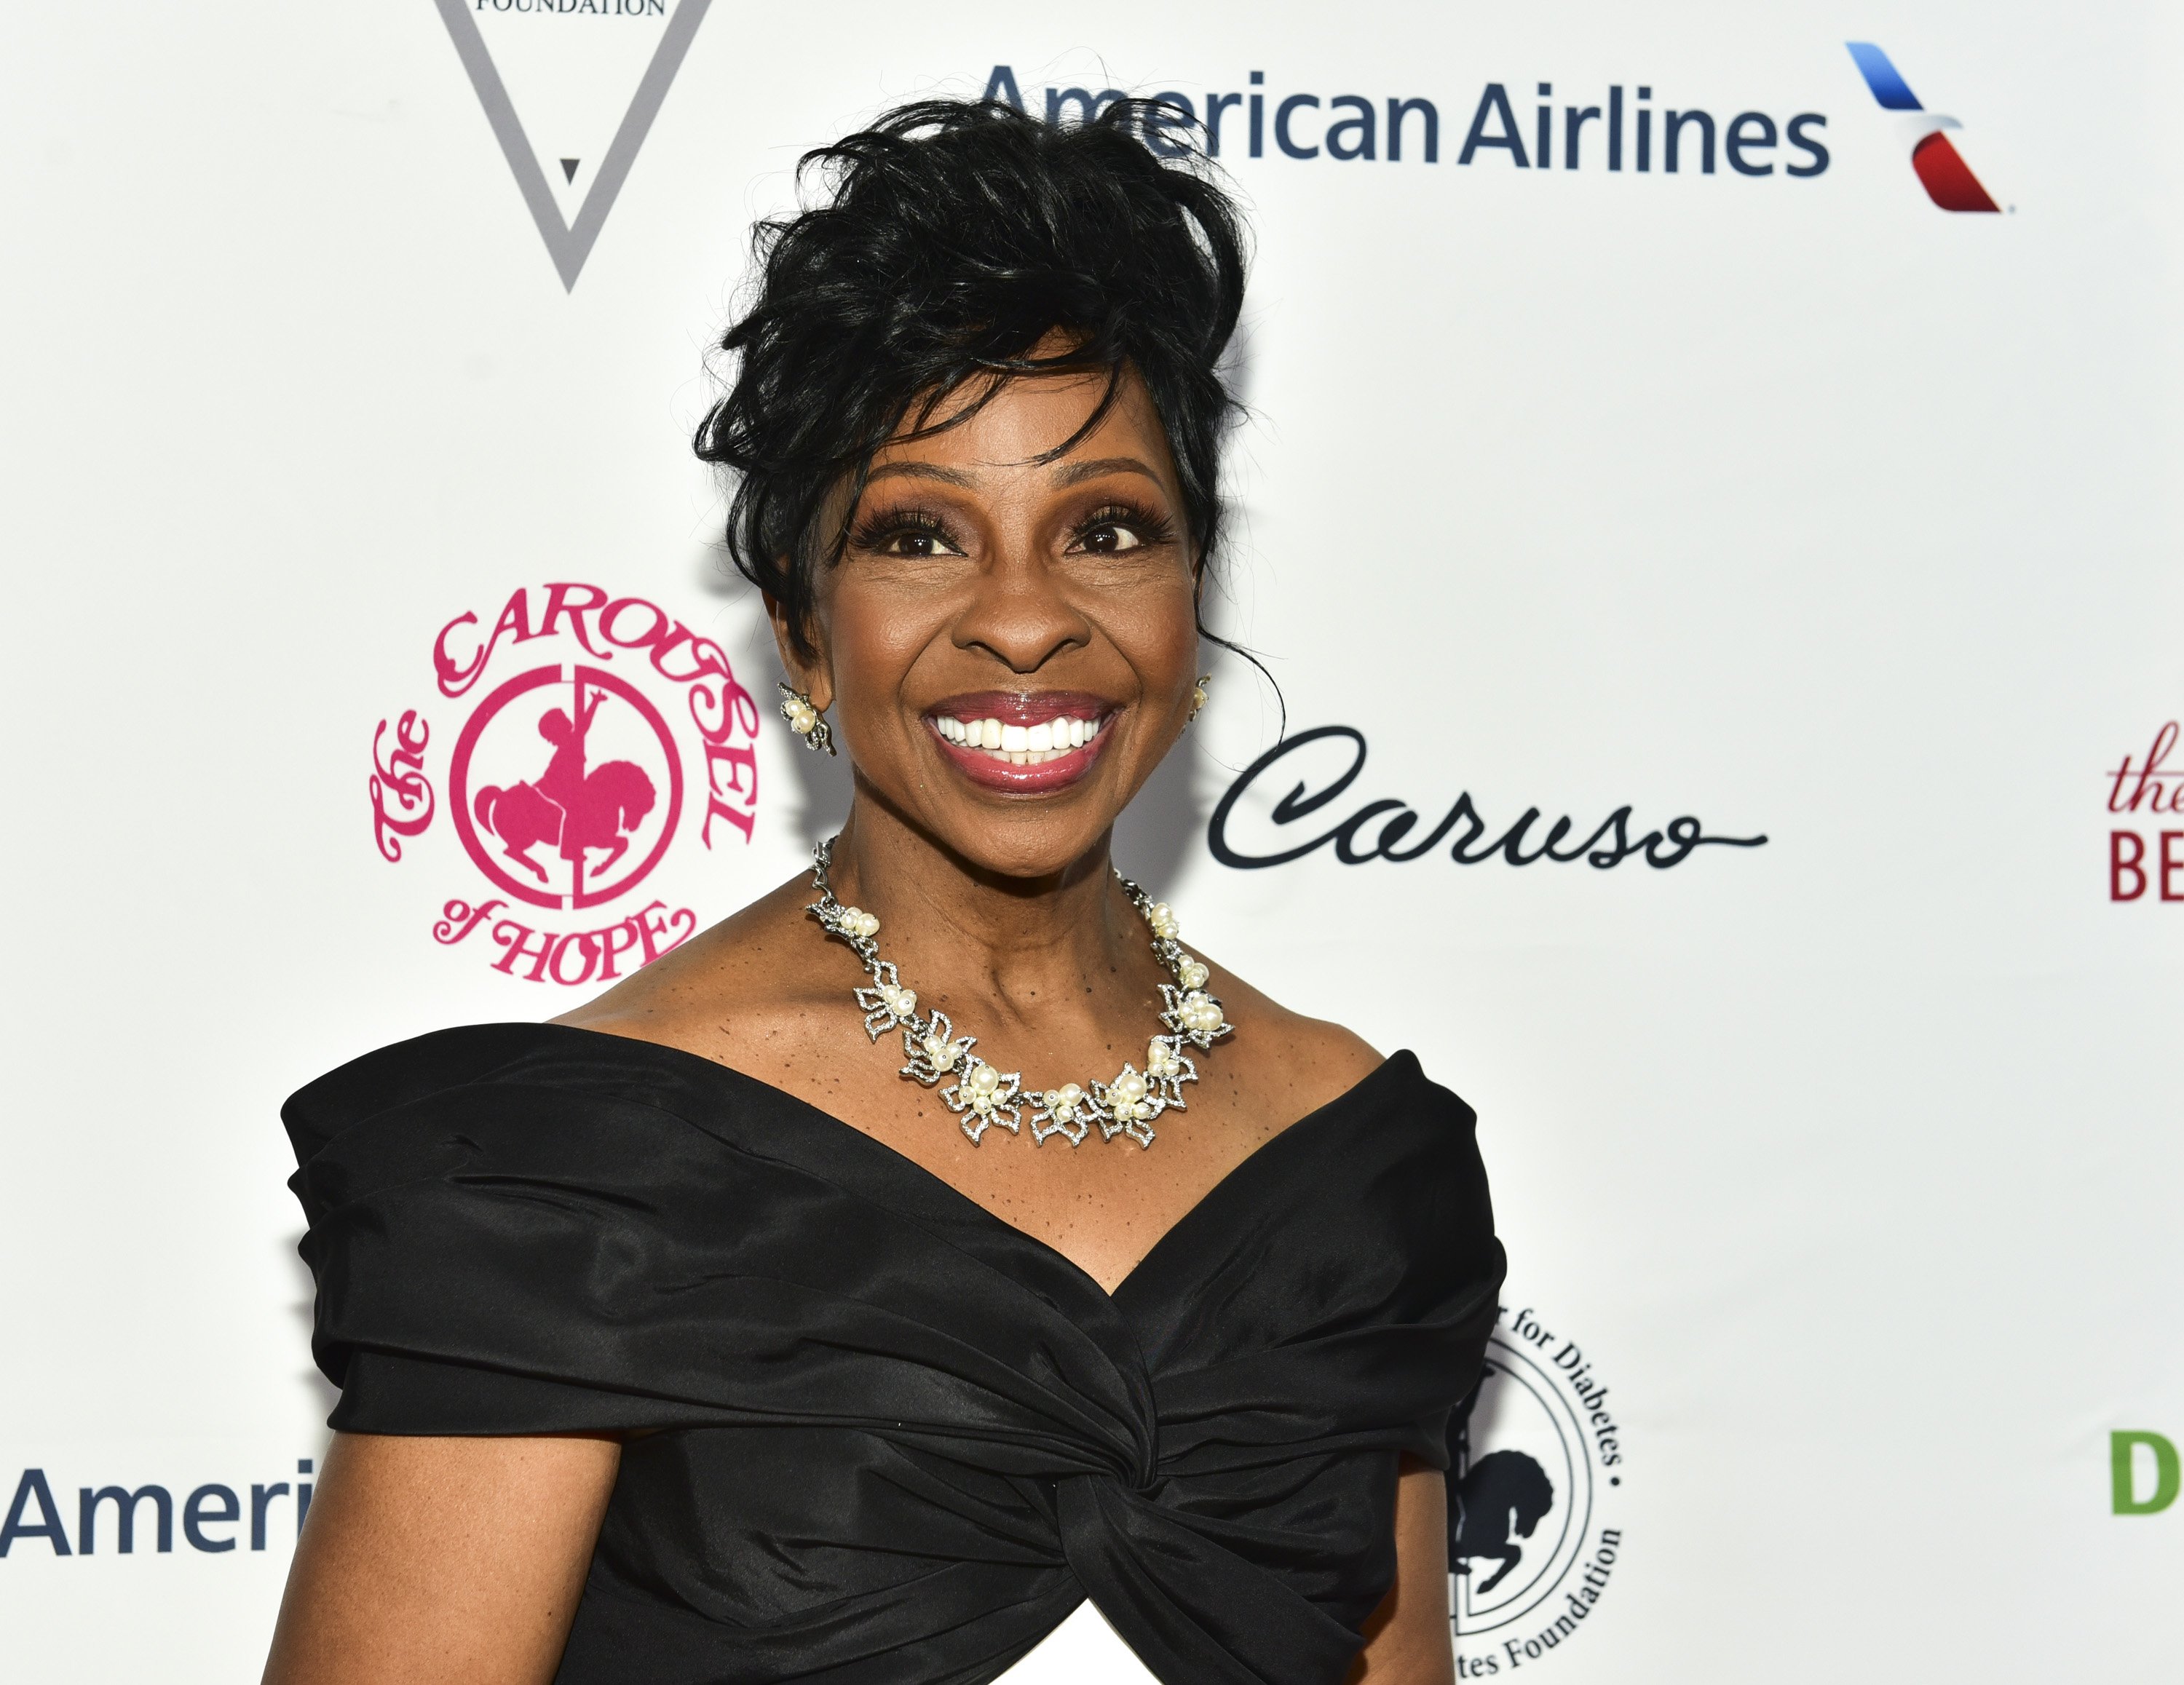 Gladys Knight beim Carousel of Hope Ball am 6. Oktober 2018. | Quelle: Getty Images